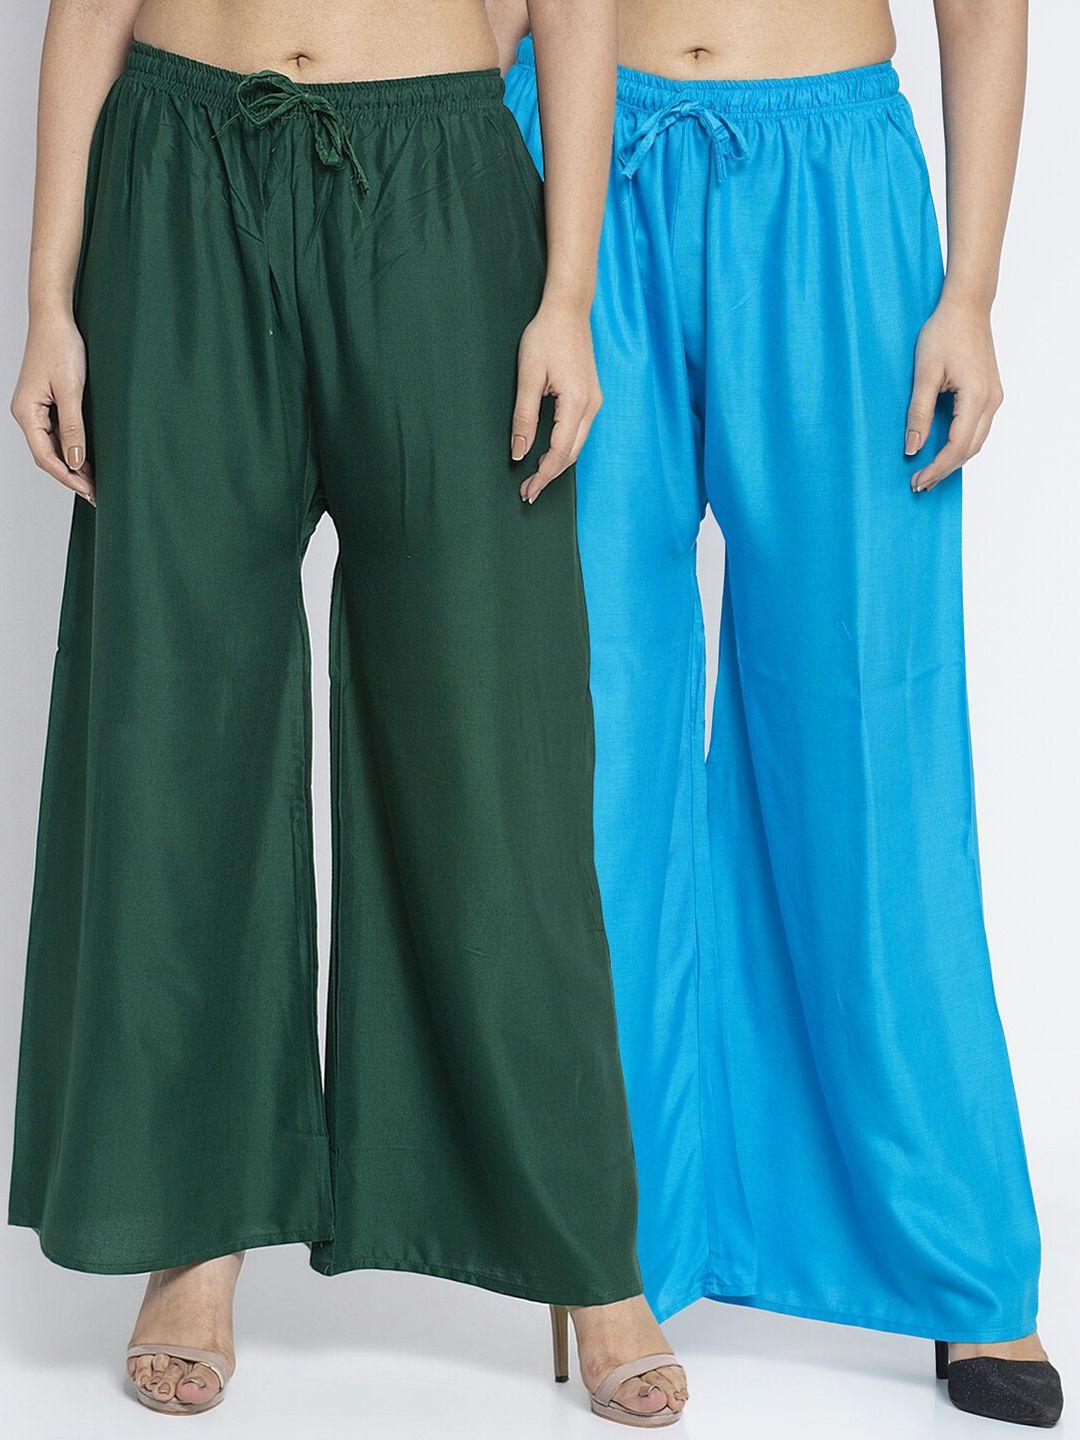 gracit women pack of 2 green & turquoise blue ethnic palazzos